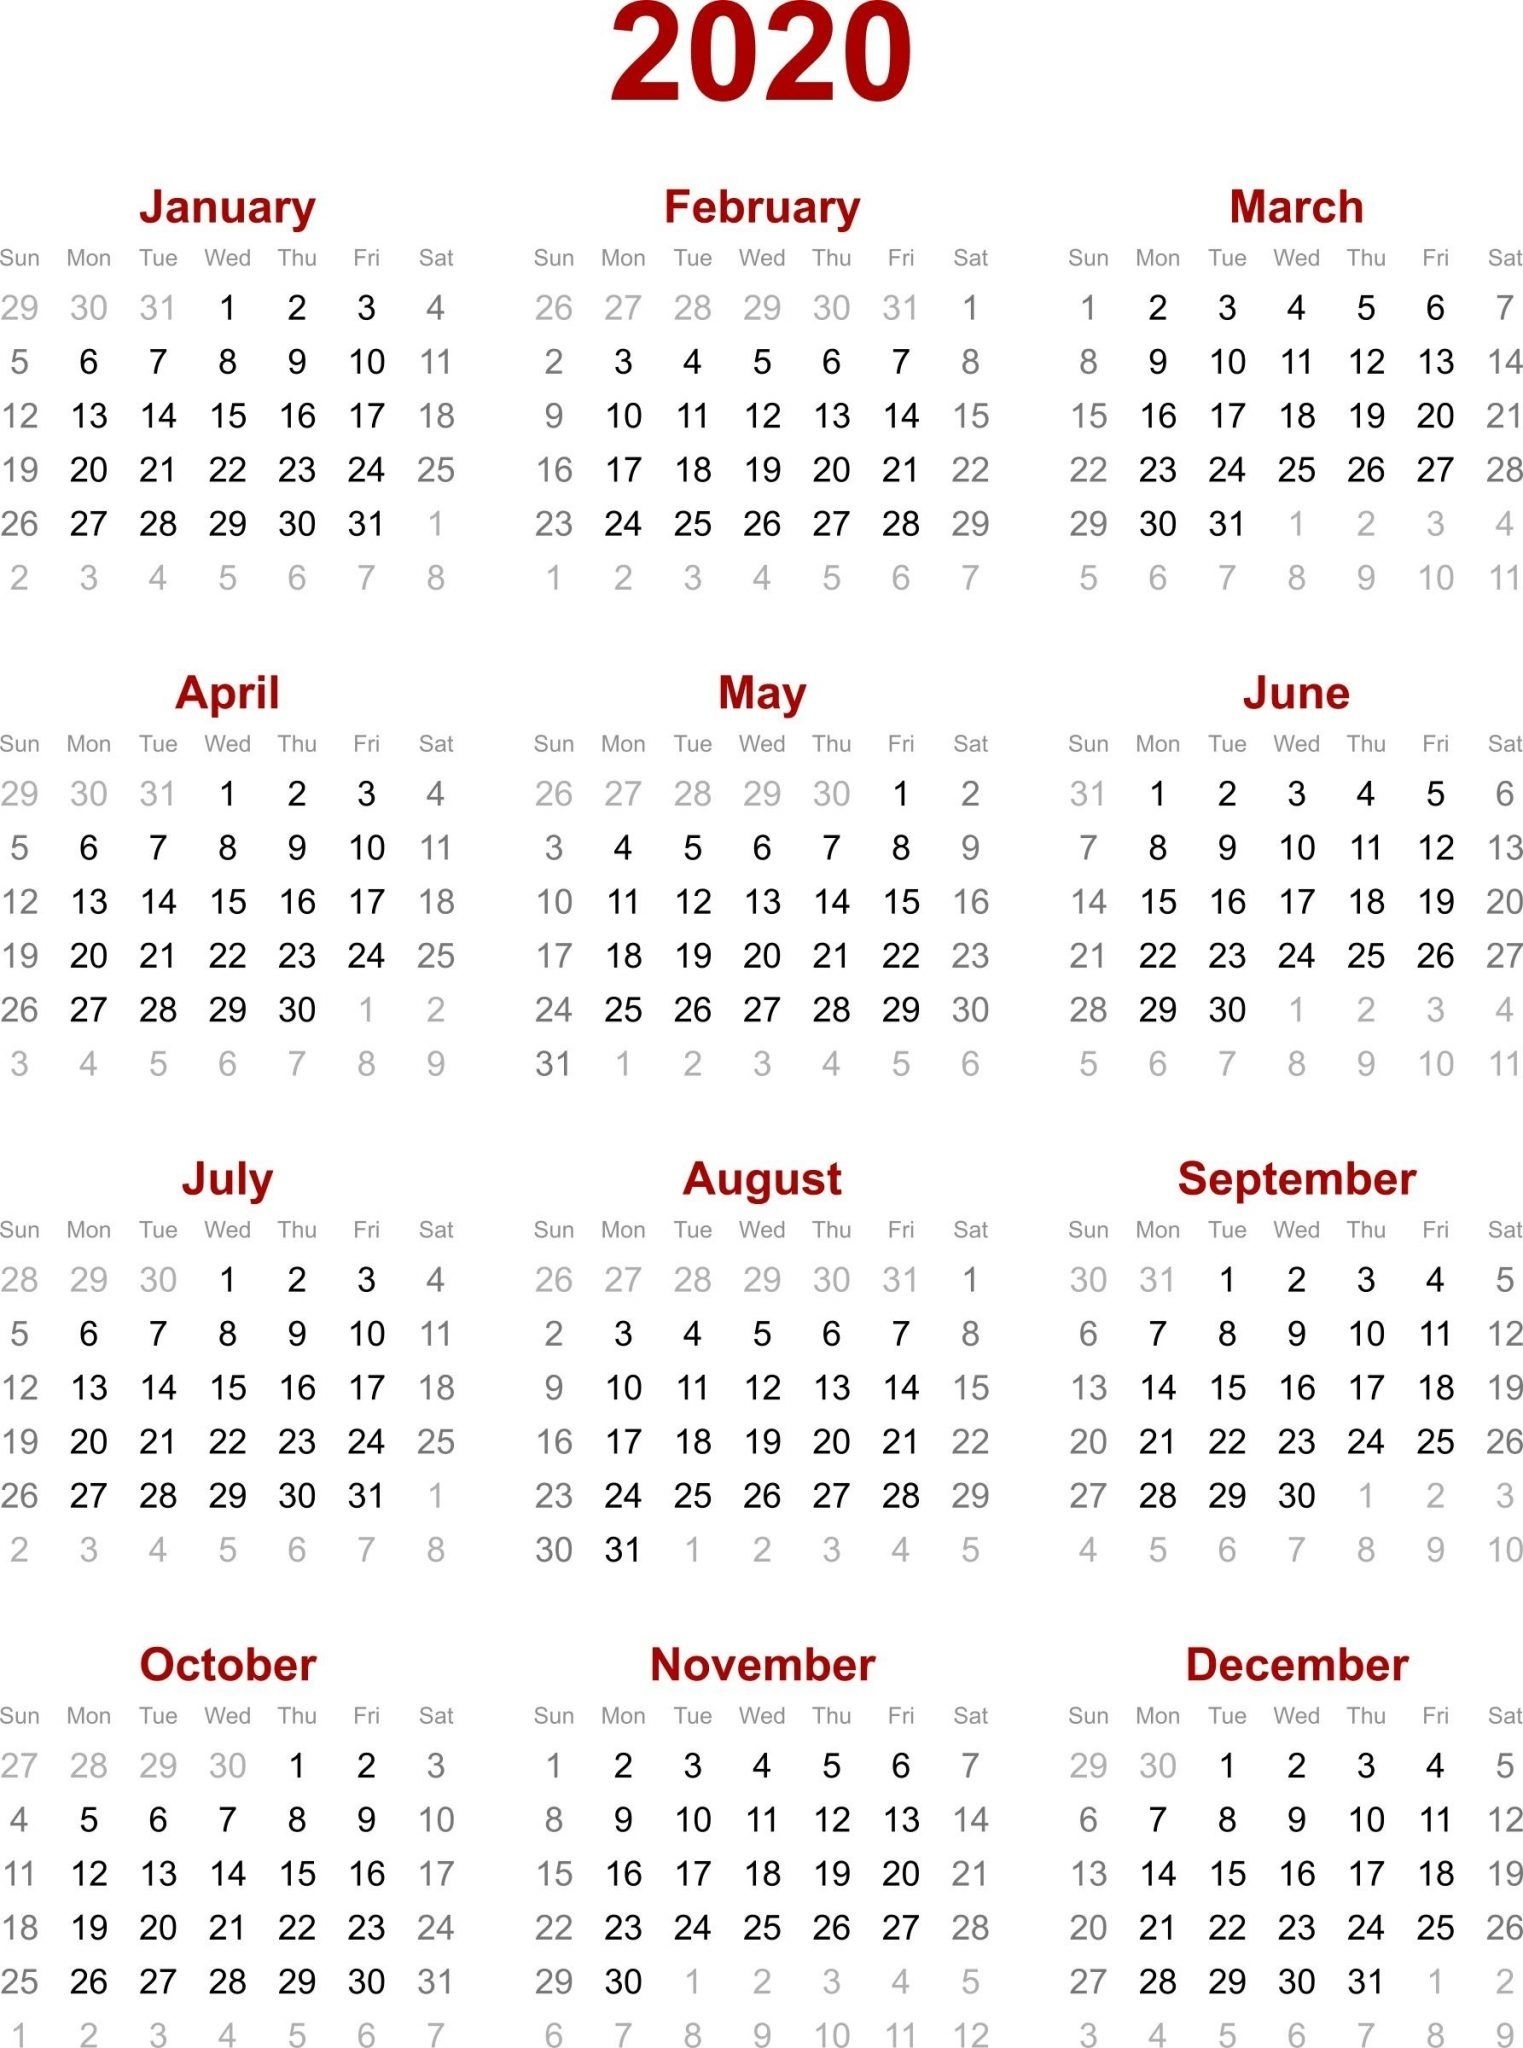 Chinese Calendar 2020 Printable Template | 2020 Calendar 2020 Calender With Luner Dates